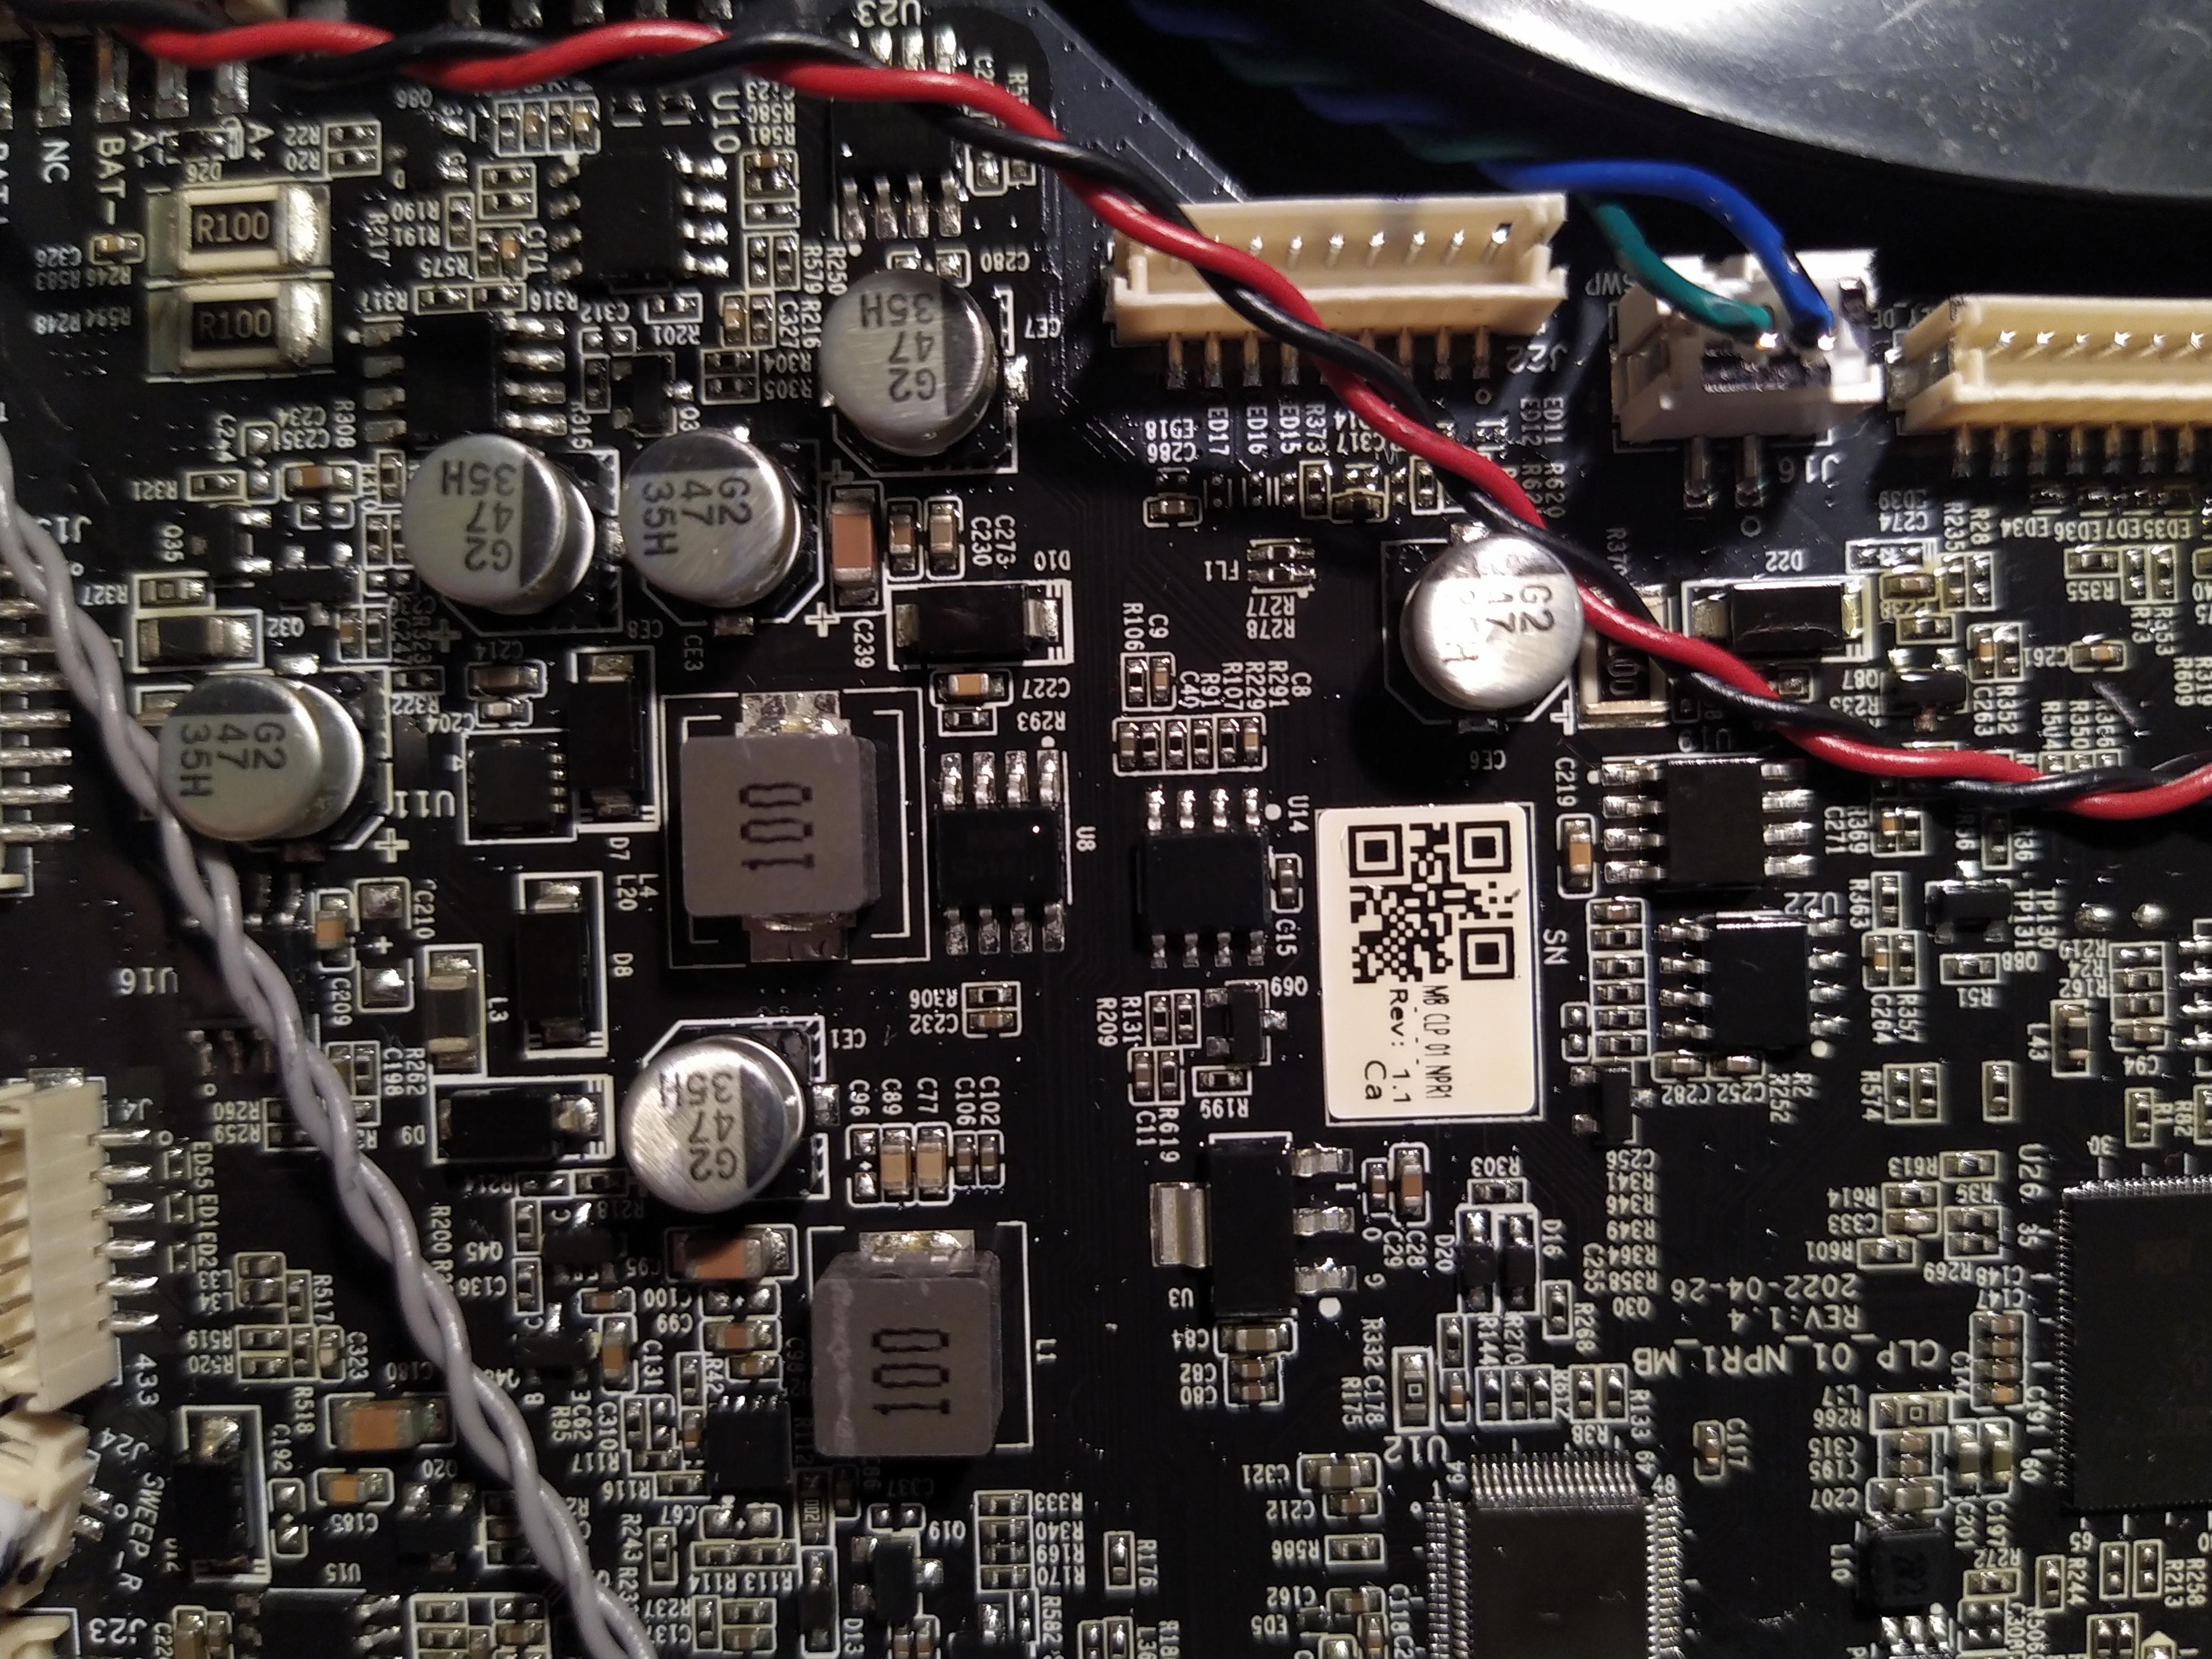 Detailed mainboard image